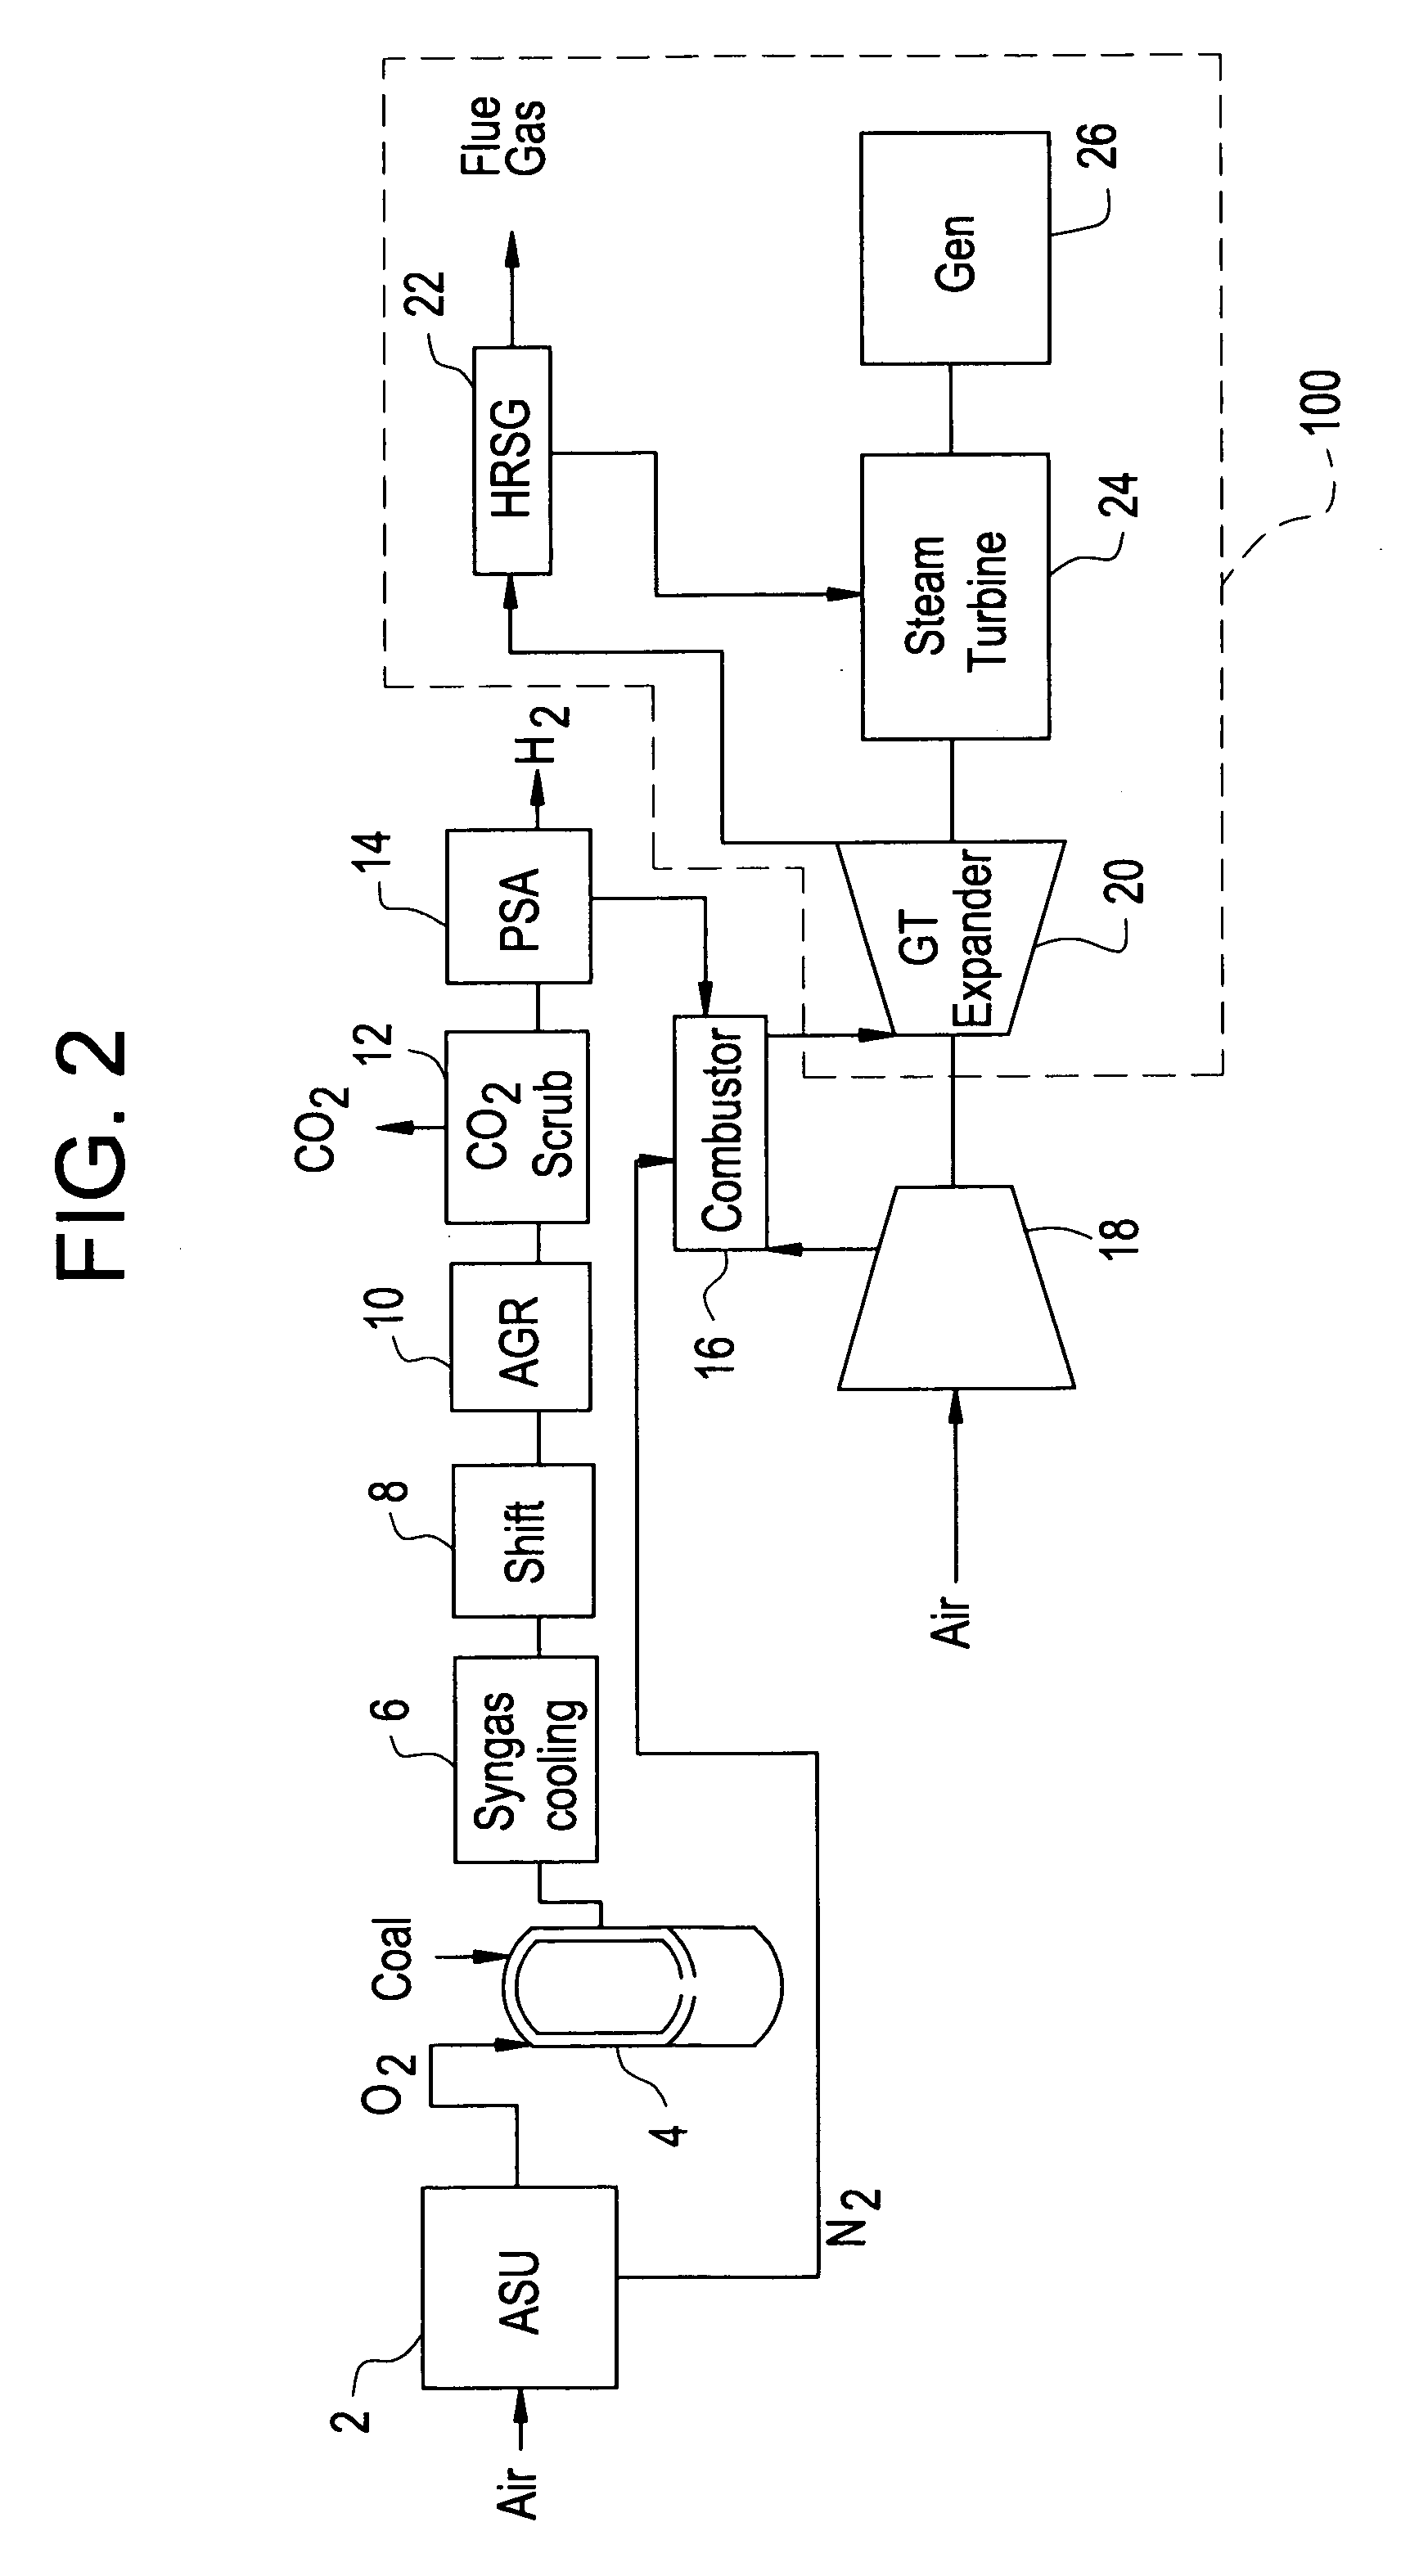 Systems and Methods Using an Unmixed Fuel Processor